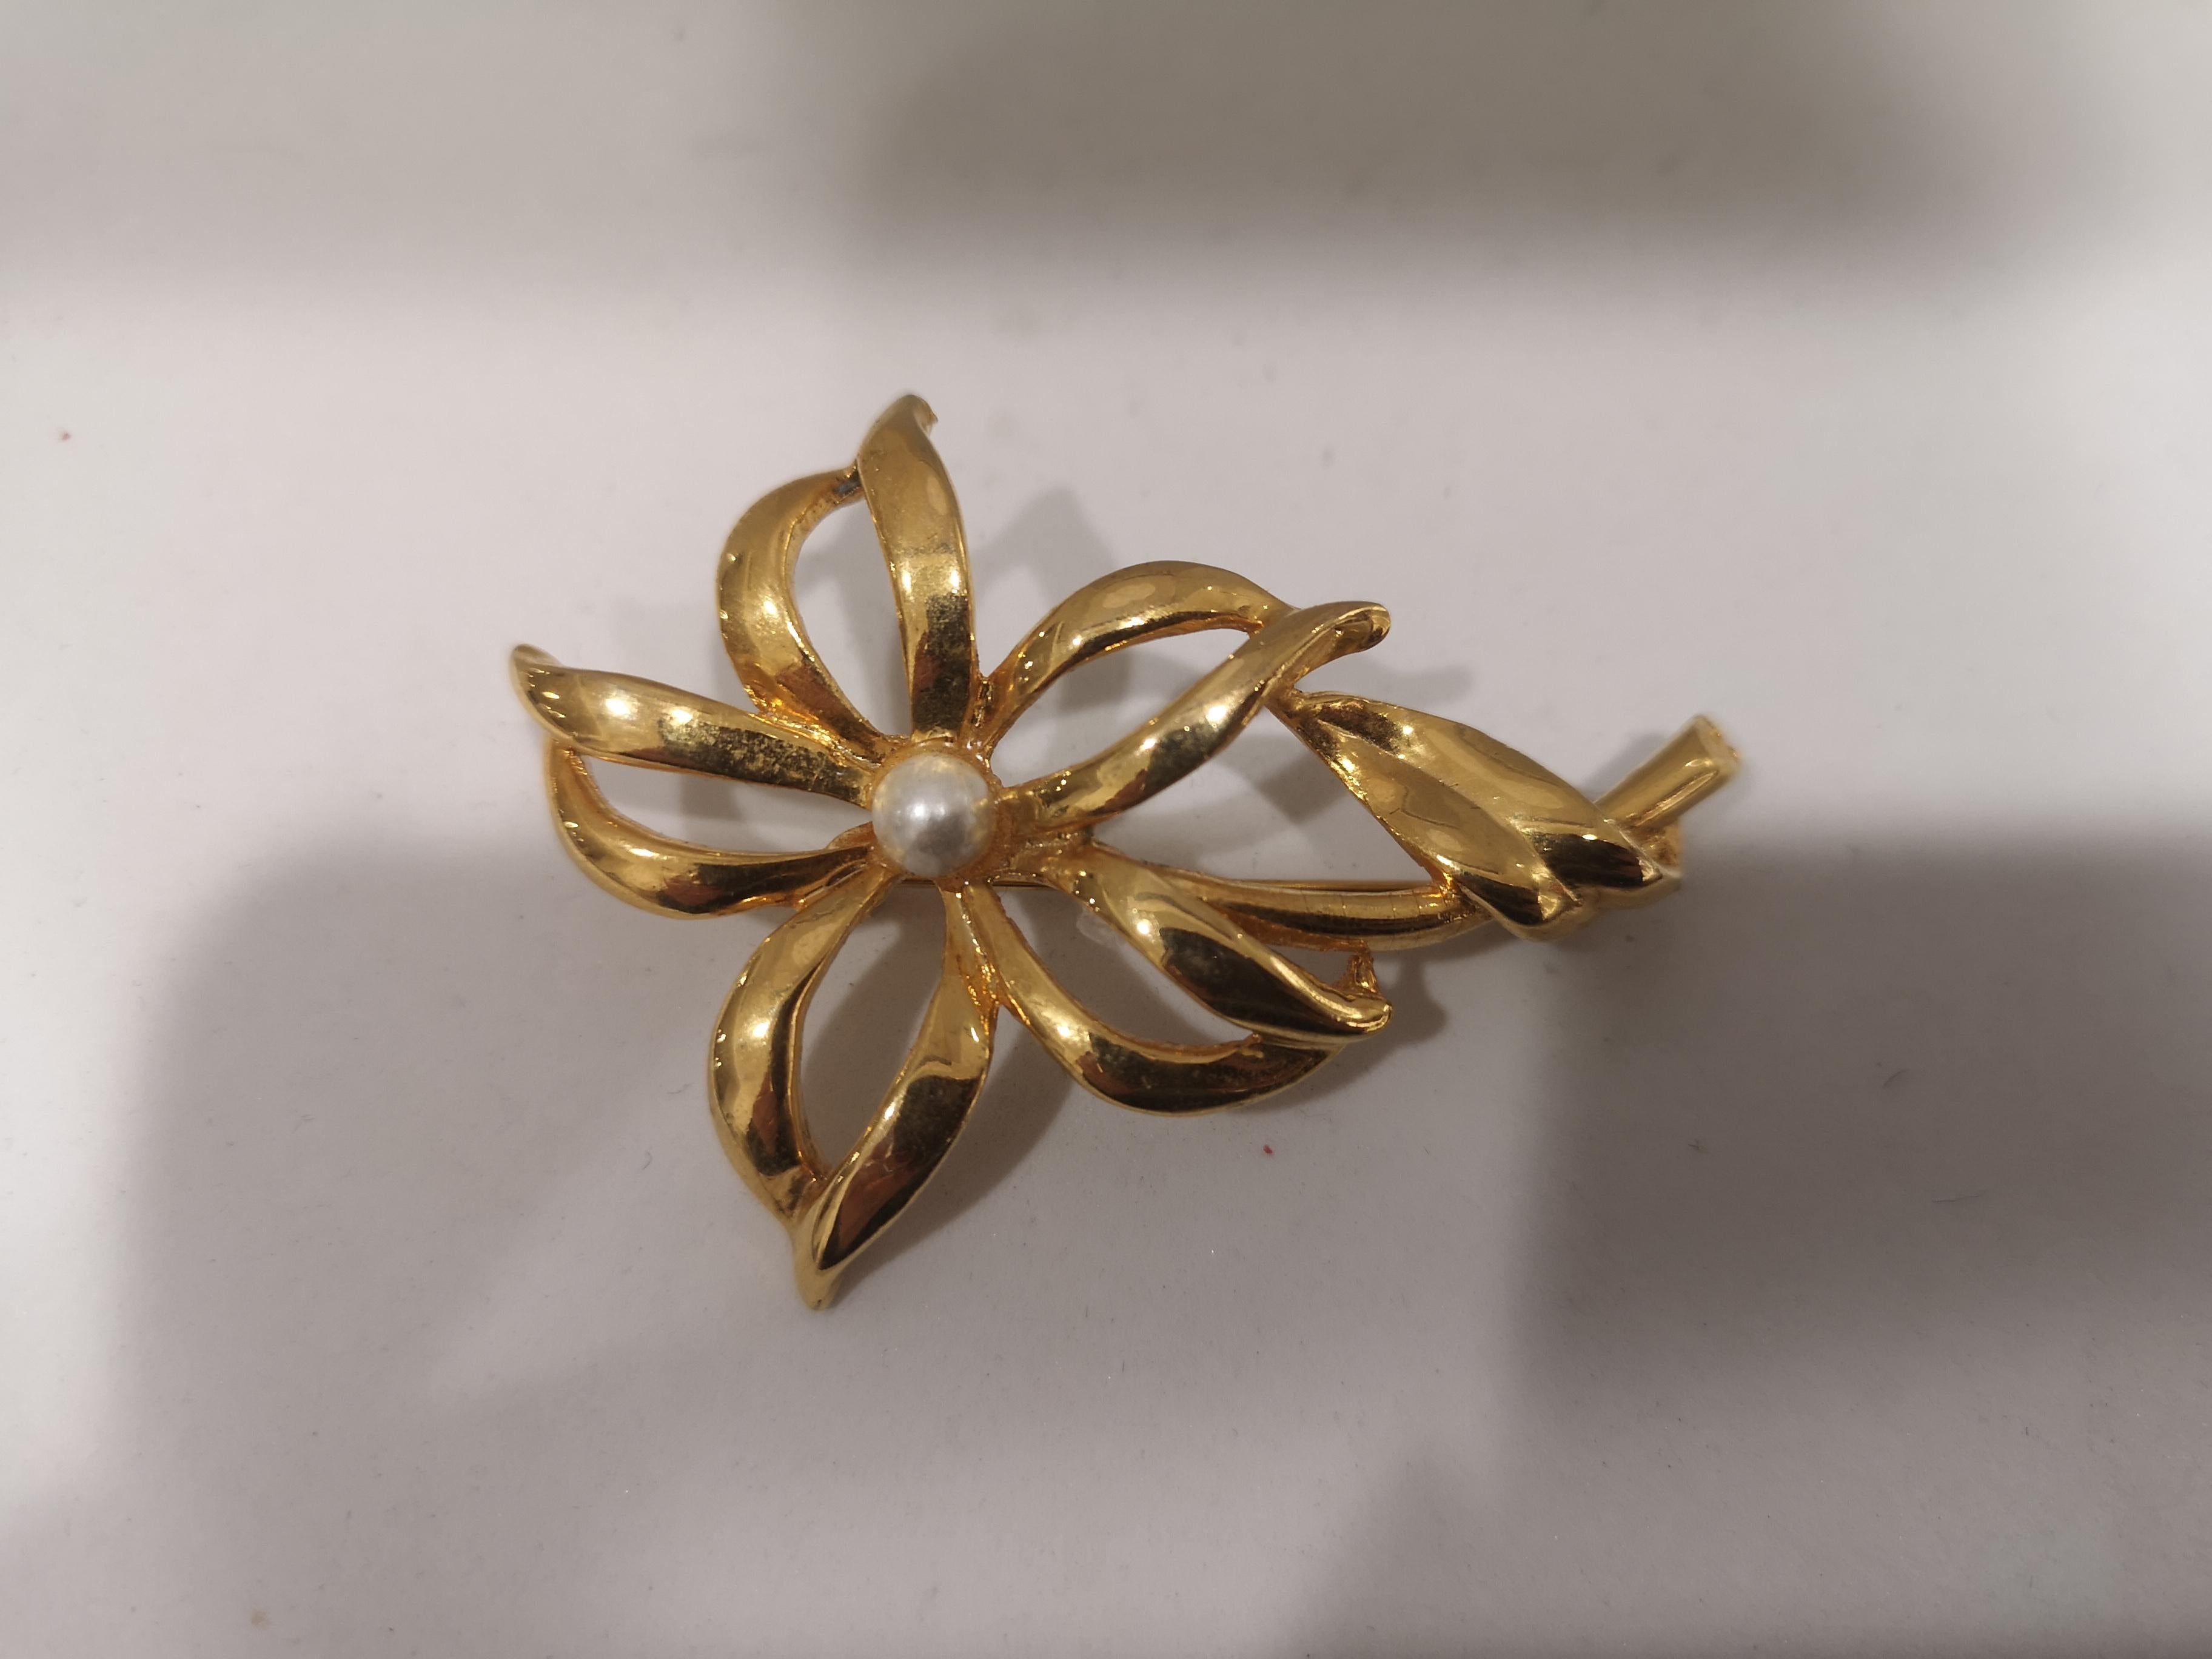 Vintage gold tone flower with faux white pearl brooch
7x4 cm